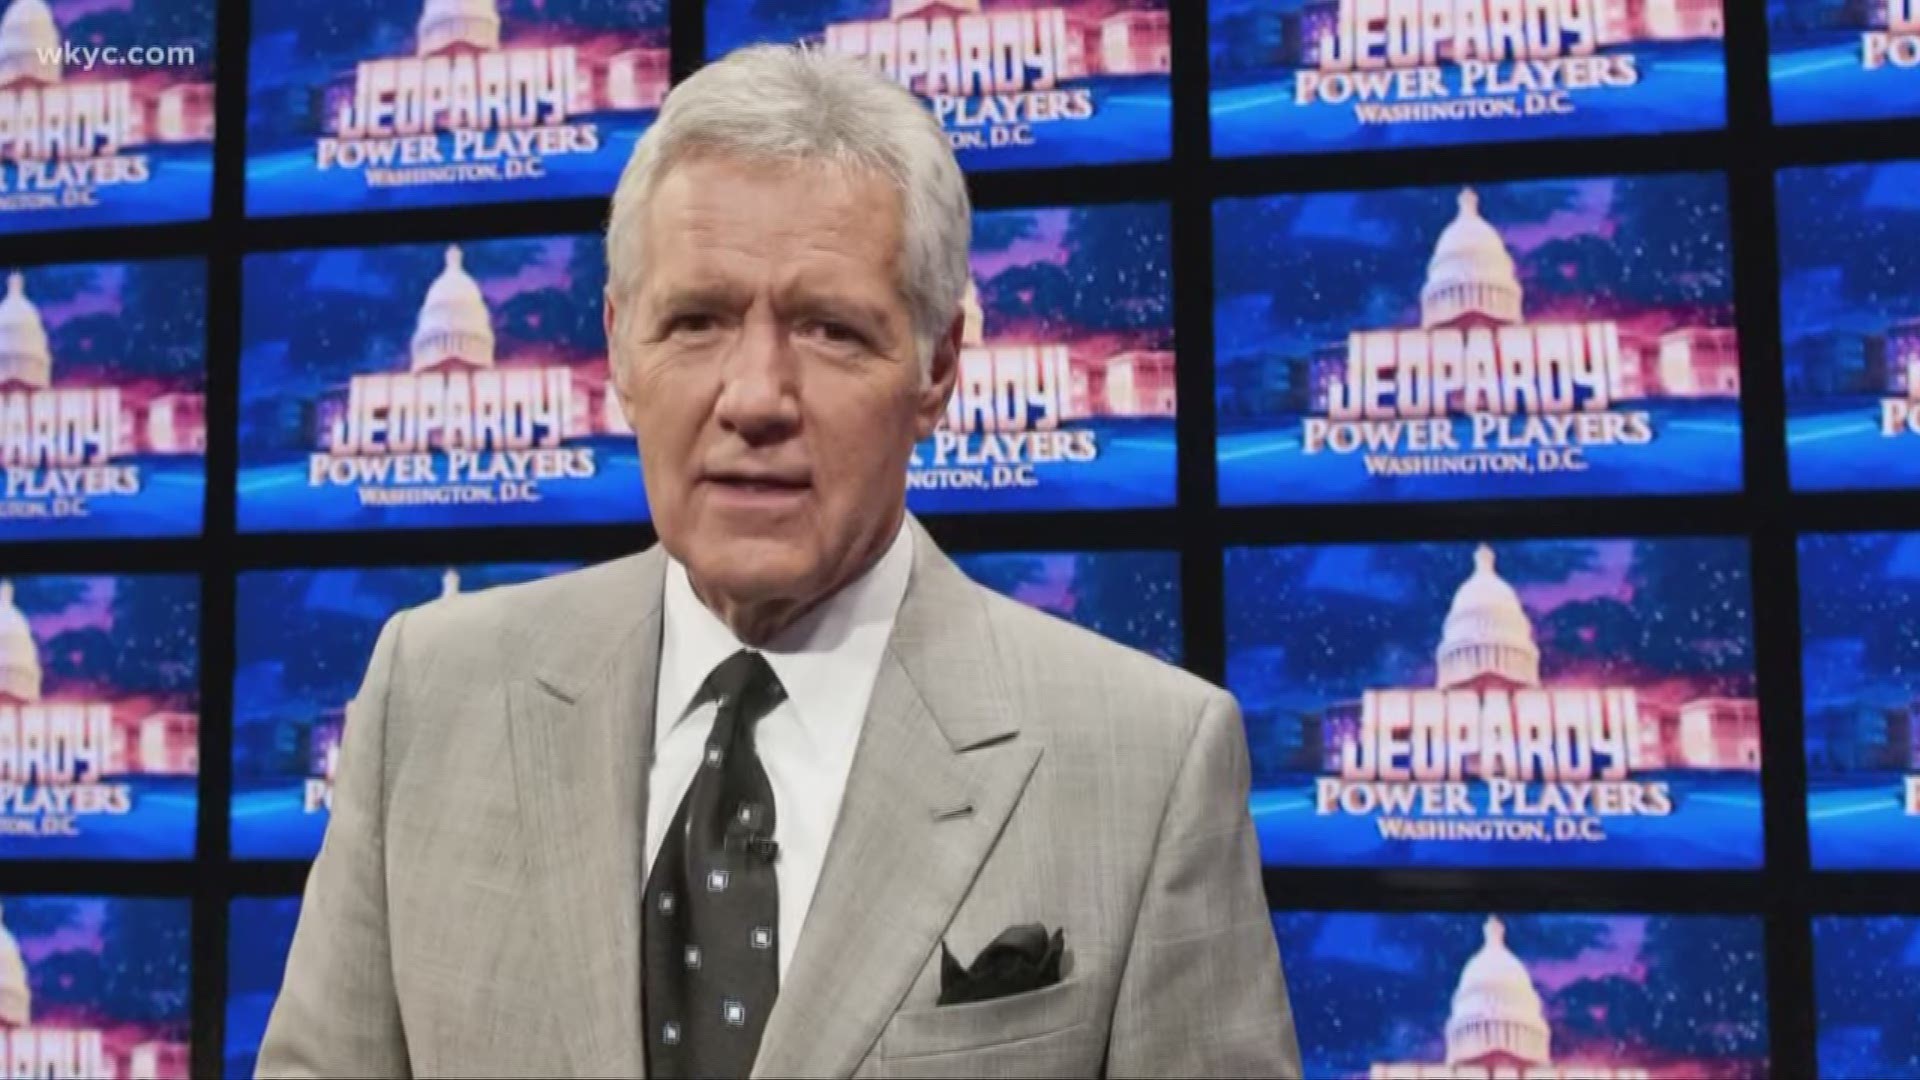 Jeopardy host Alex Trebek claims his pancreatic cancer is in partial remission. Senior Health Correspondent Monica Robins explains how this breakthrough could be possible.